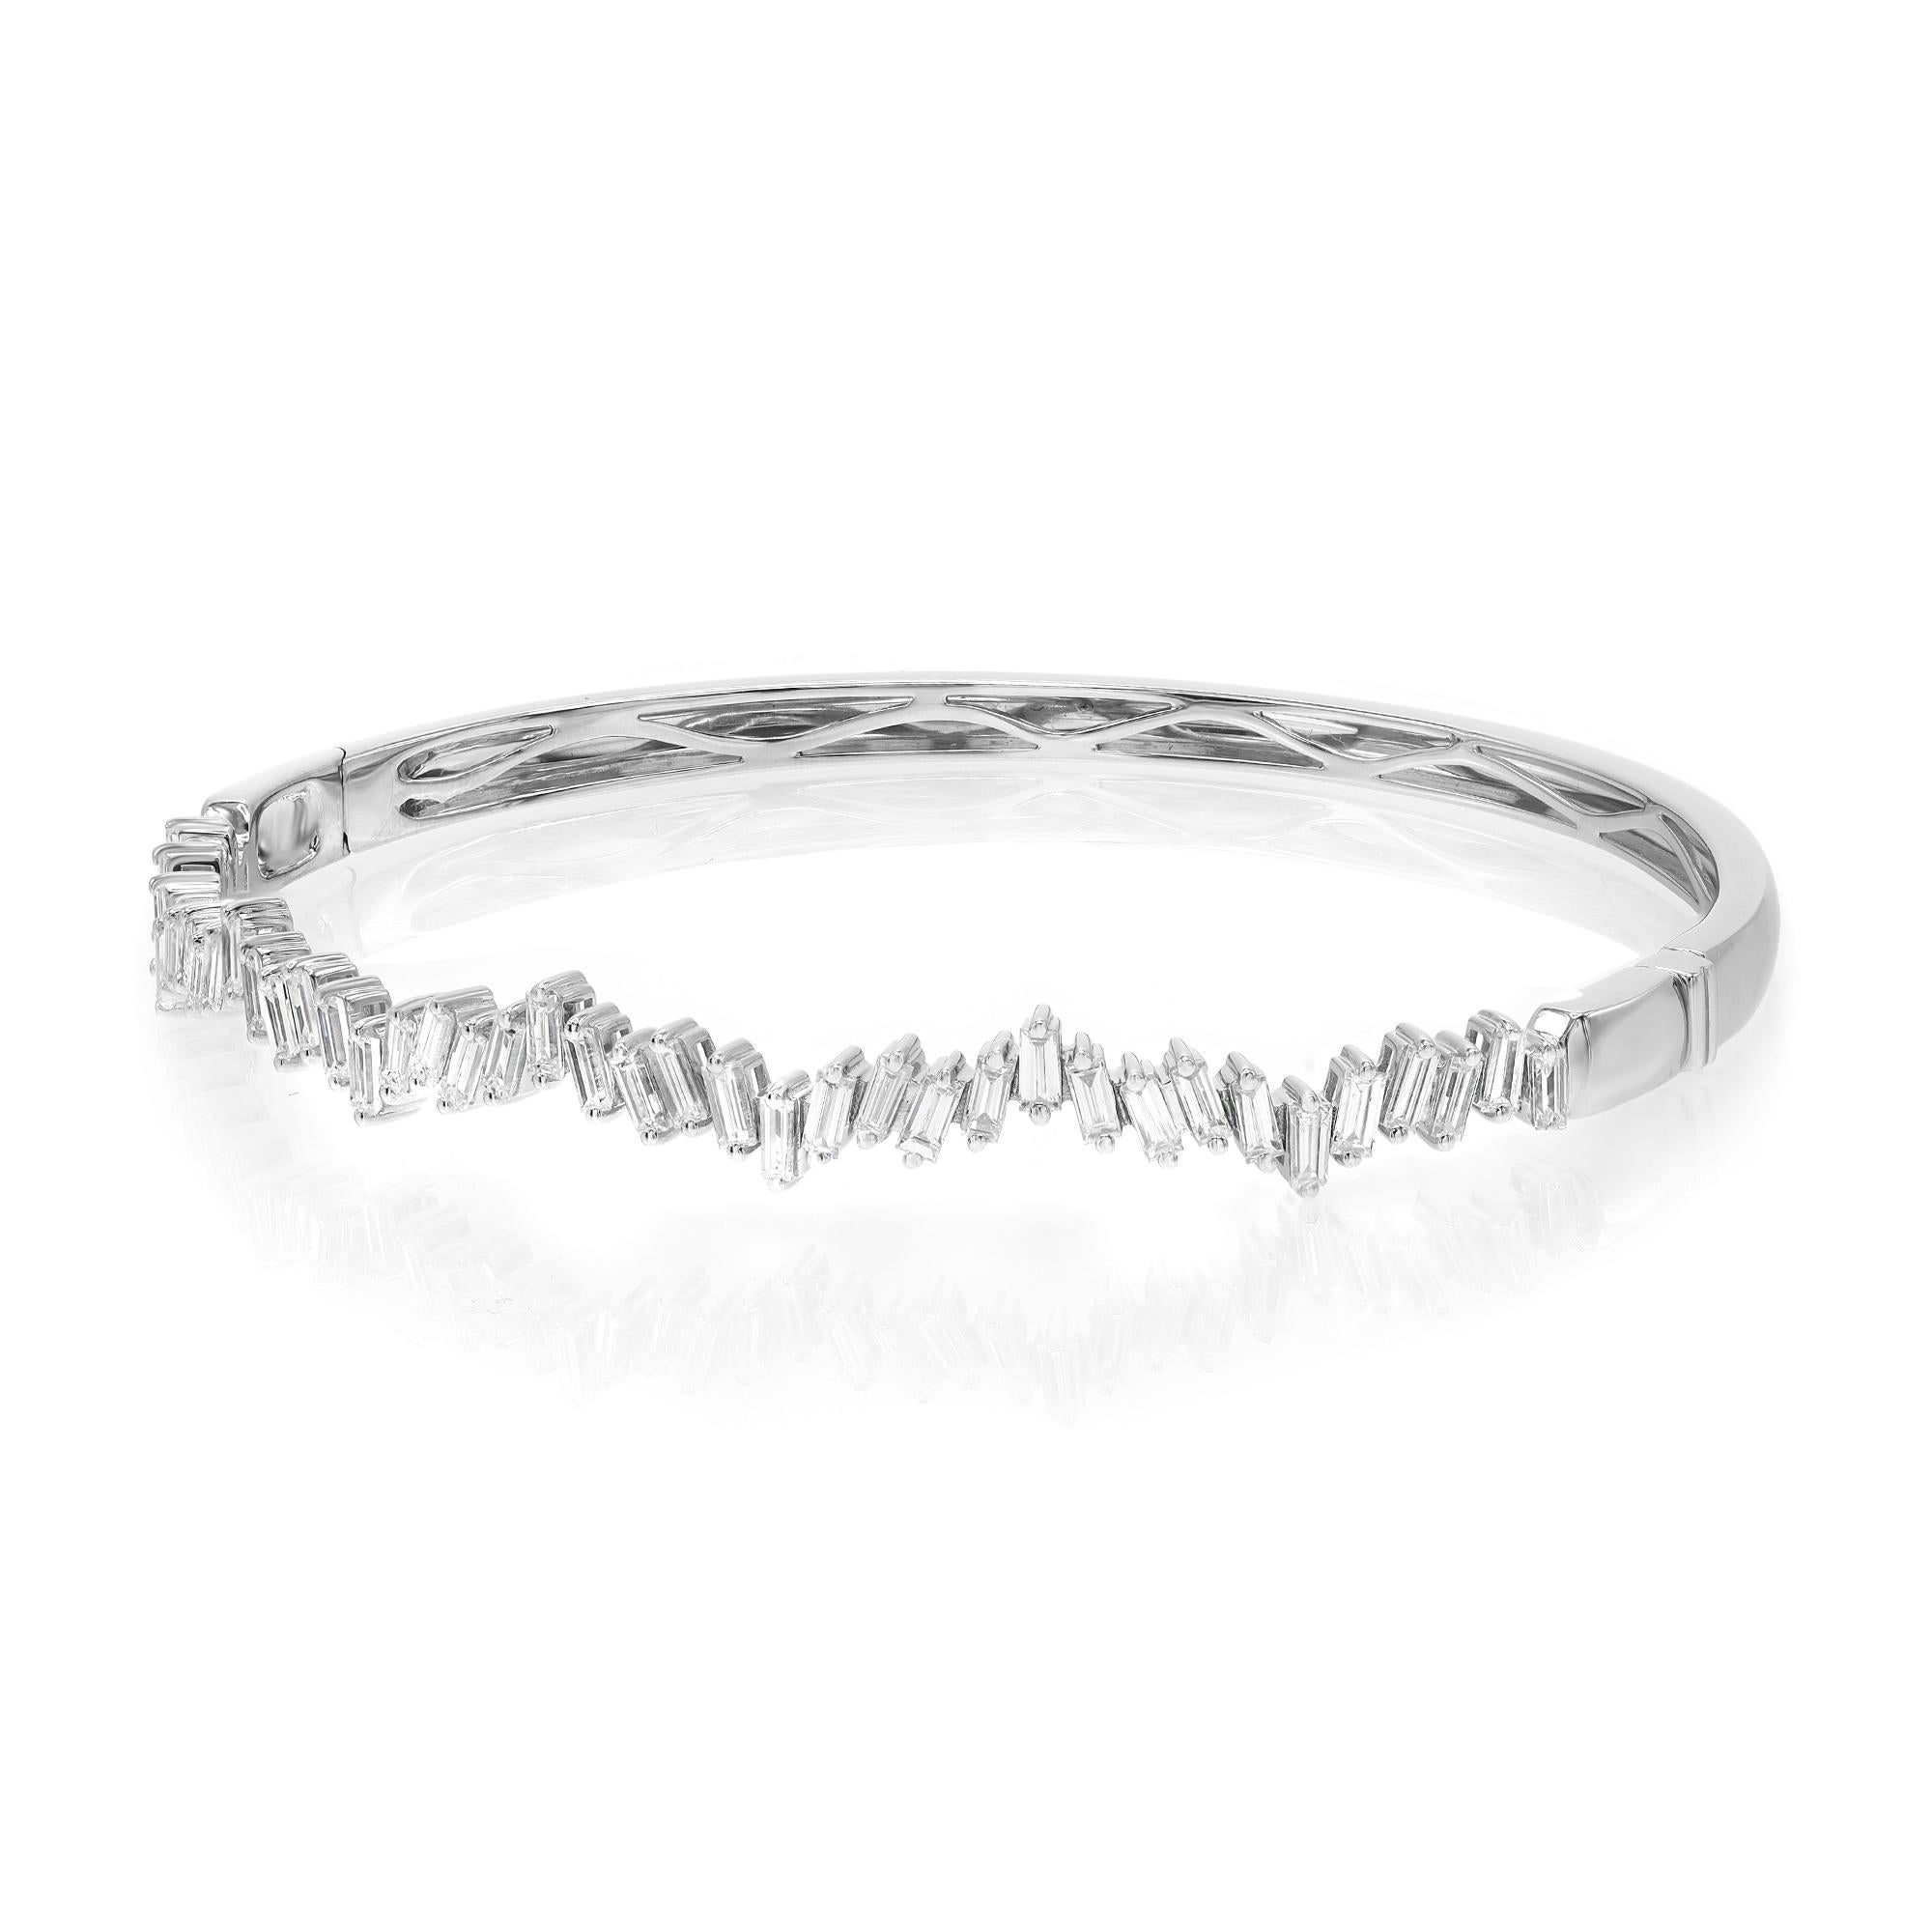 A classic look with easy elegance, this diamond bangle bracelet exudes sophistication. Crafted in 18k white gold. This bangle features baguette cut diamonds encrusted halfway through the bangle in a zig-zag pattern in prong setting with a total